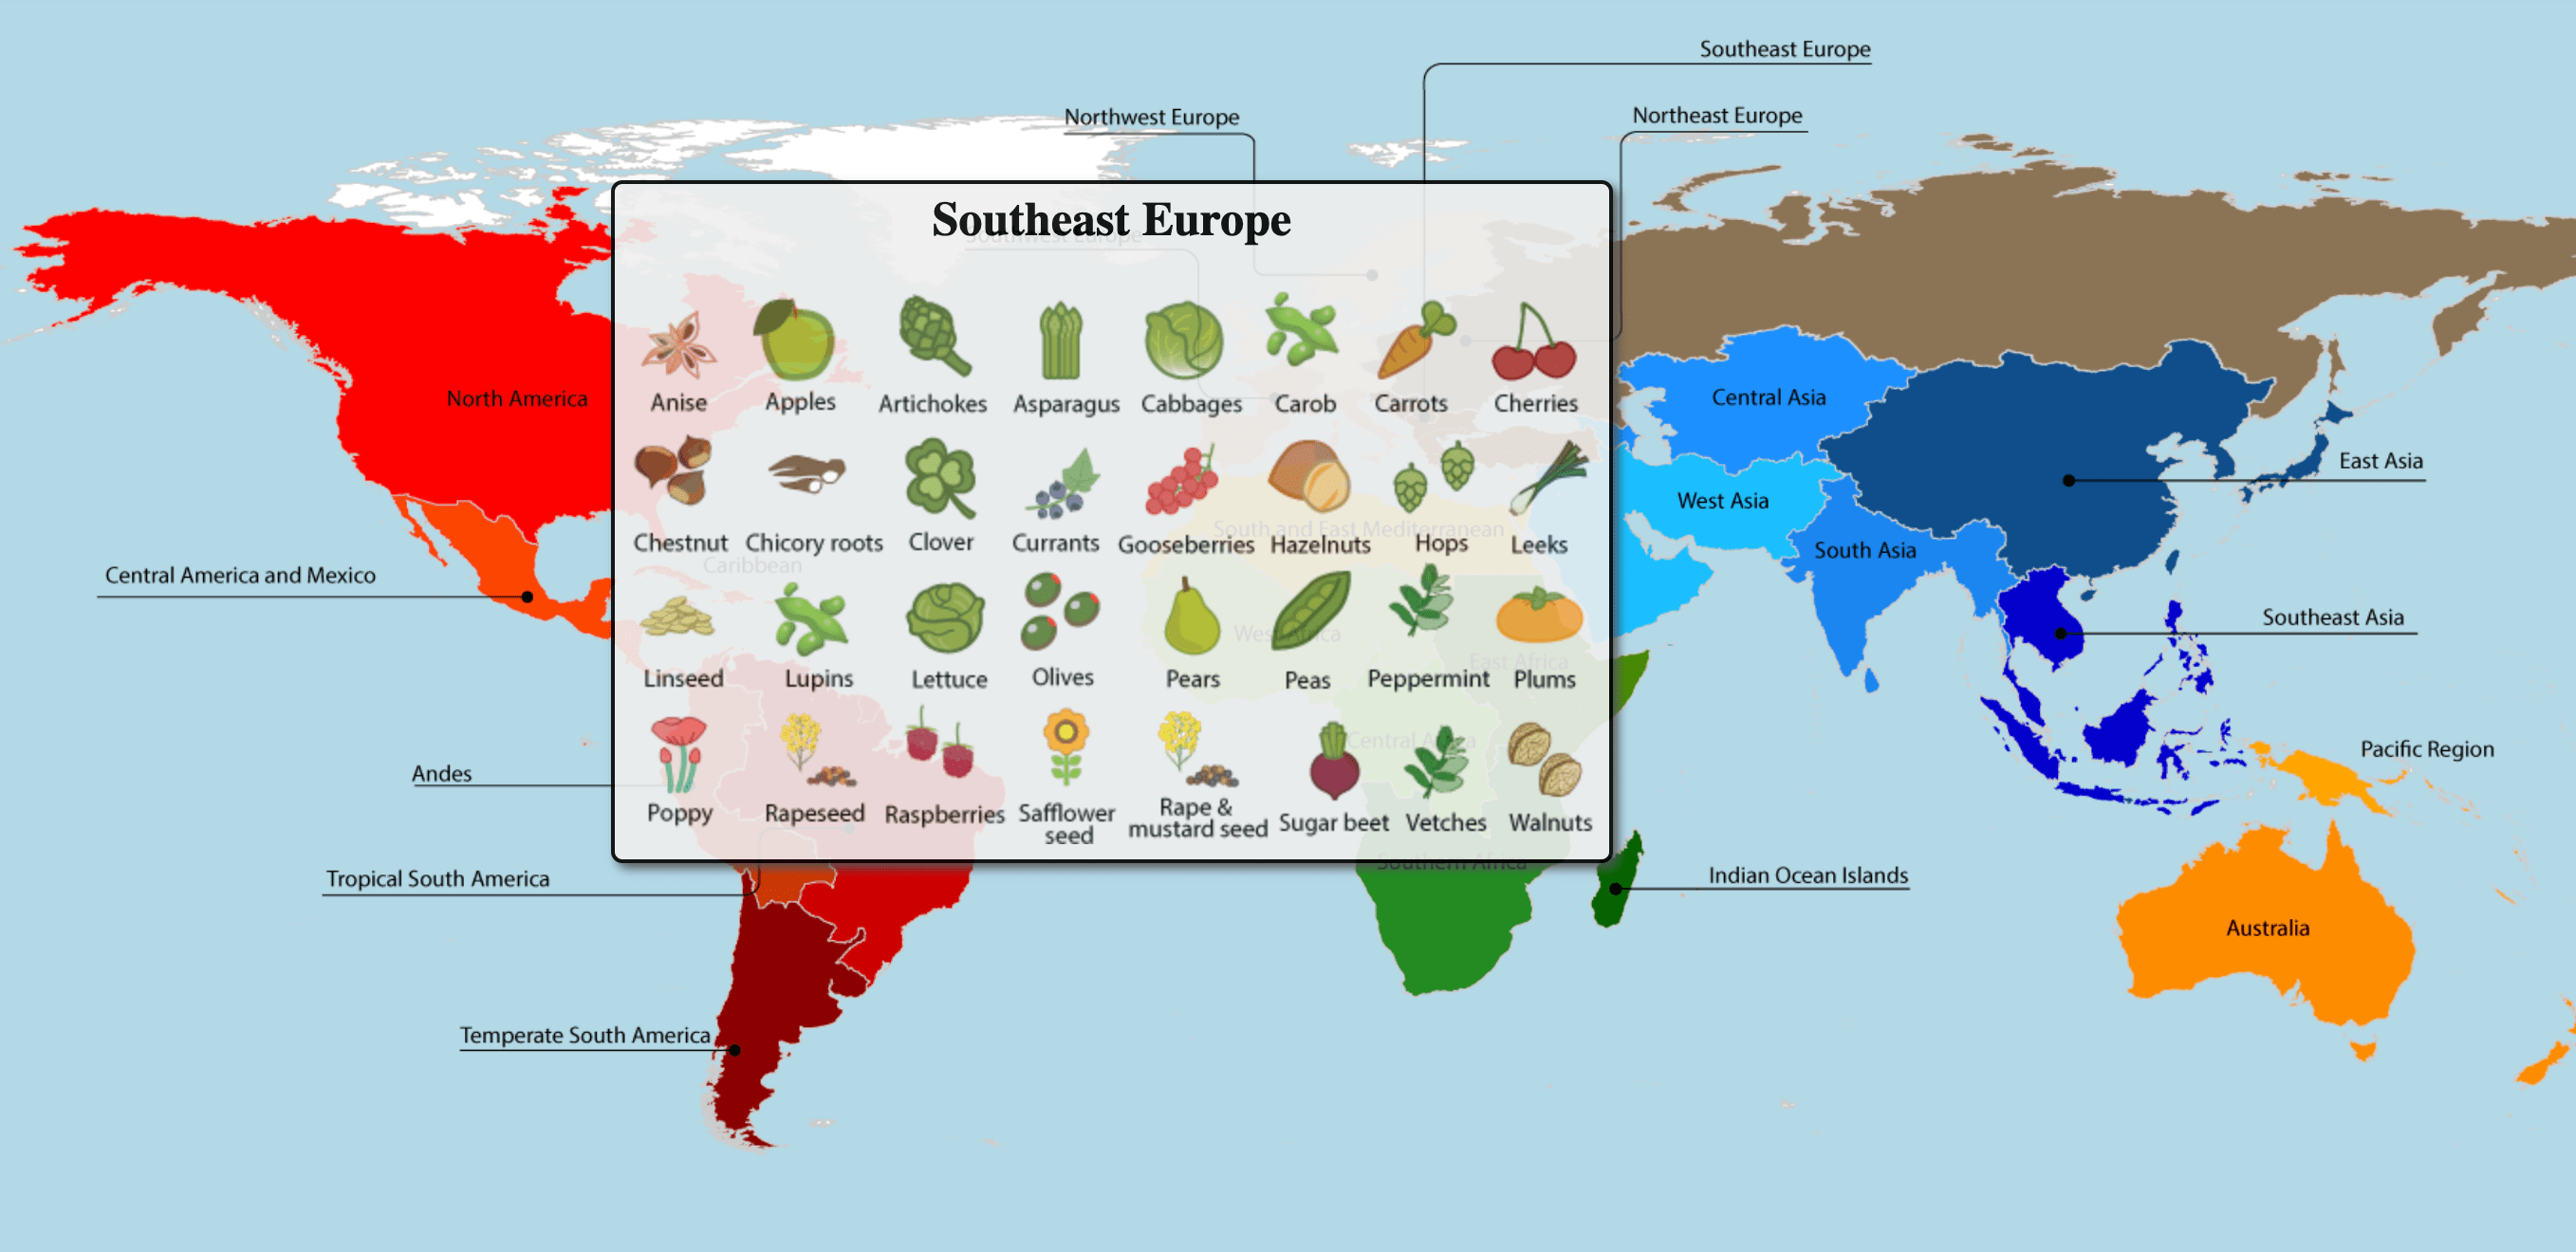 These regions countries. World food Map. South East Europe какие страны. Northeast Asia. Map of Countries of North and South America.